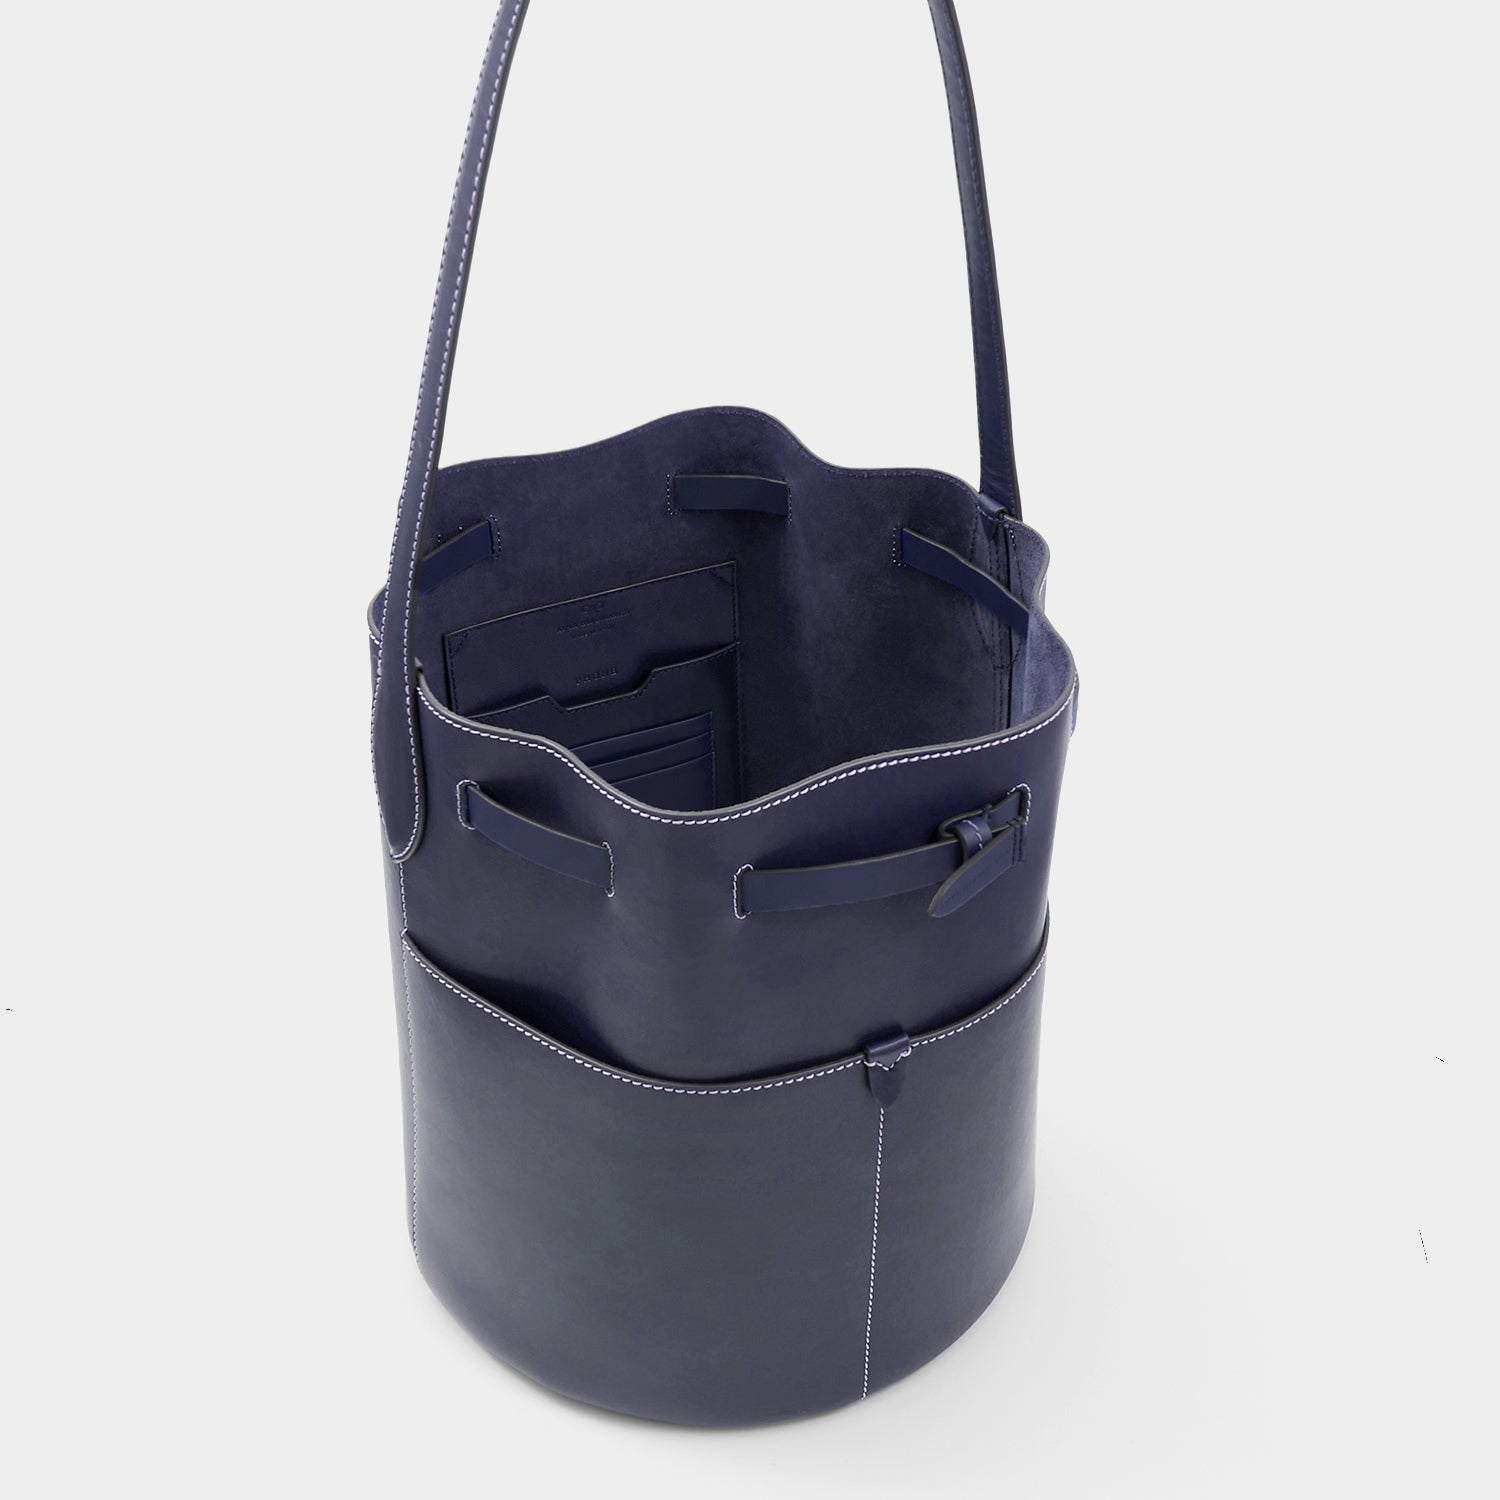 「Return to Nature」バケットバッグ -

                  
                    Compostable Leather in Marine -
                  

                  Anya Hindmarch JP
